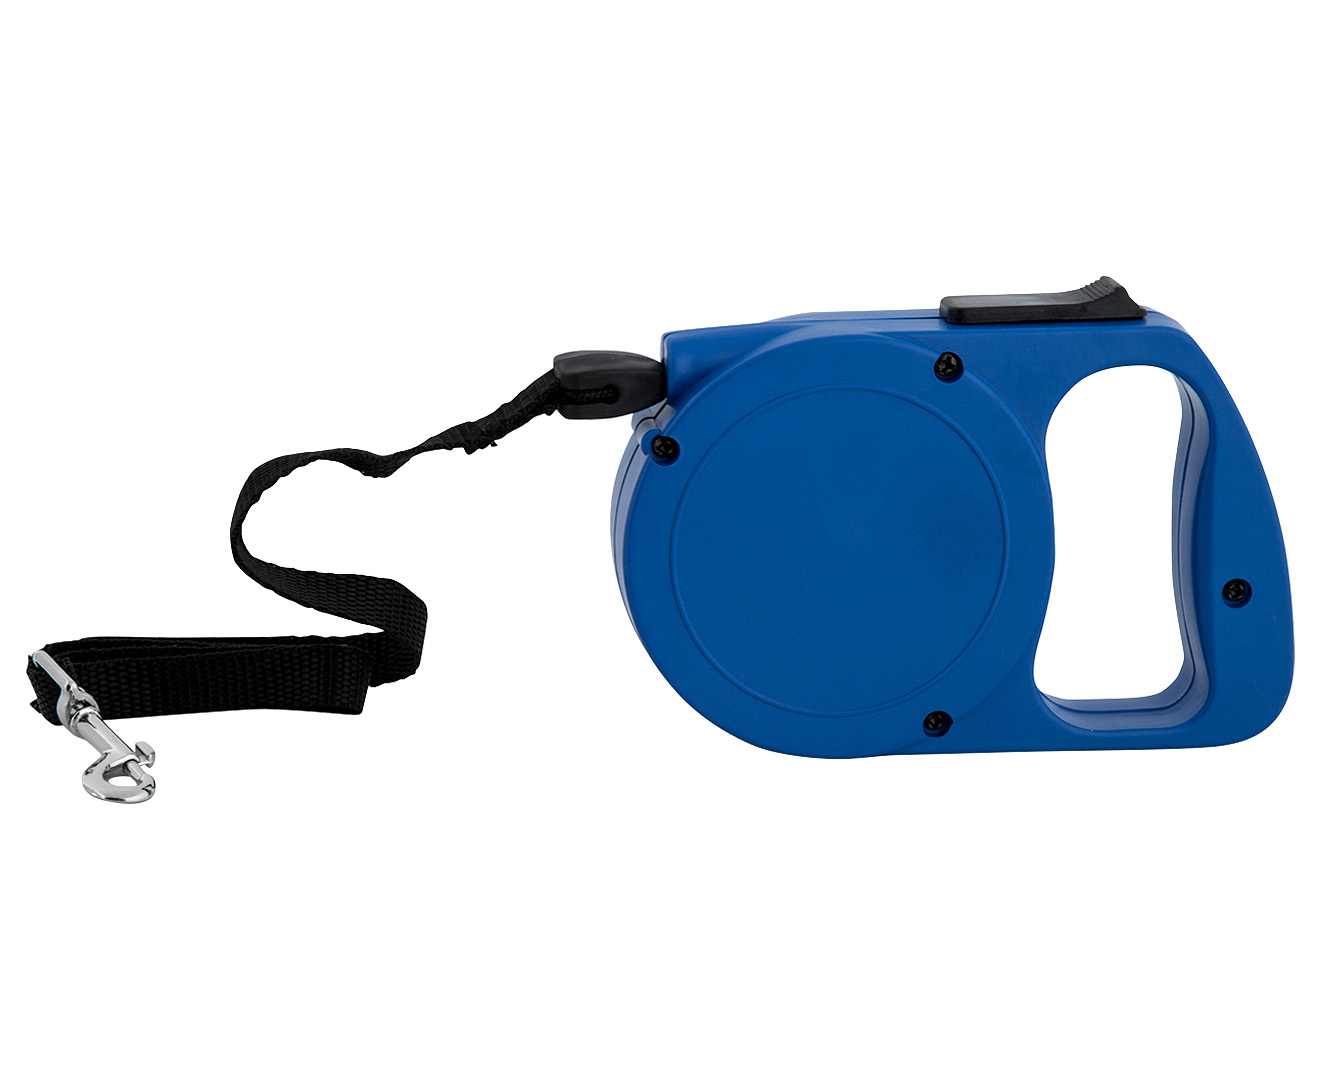 Paws & Claws 5m Retractable Auto Dog Lead - Blue